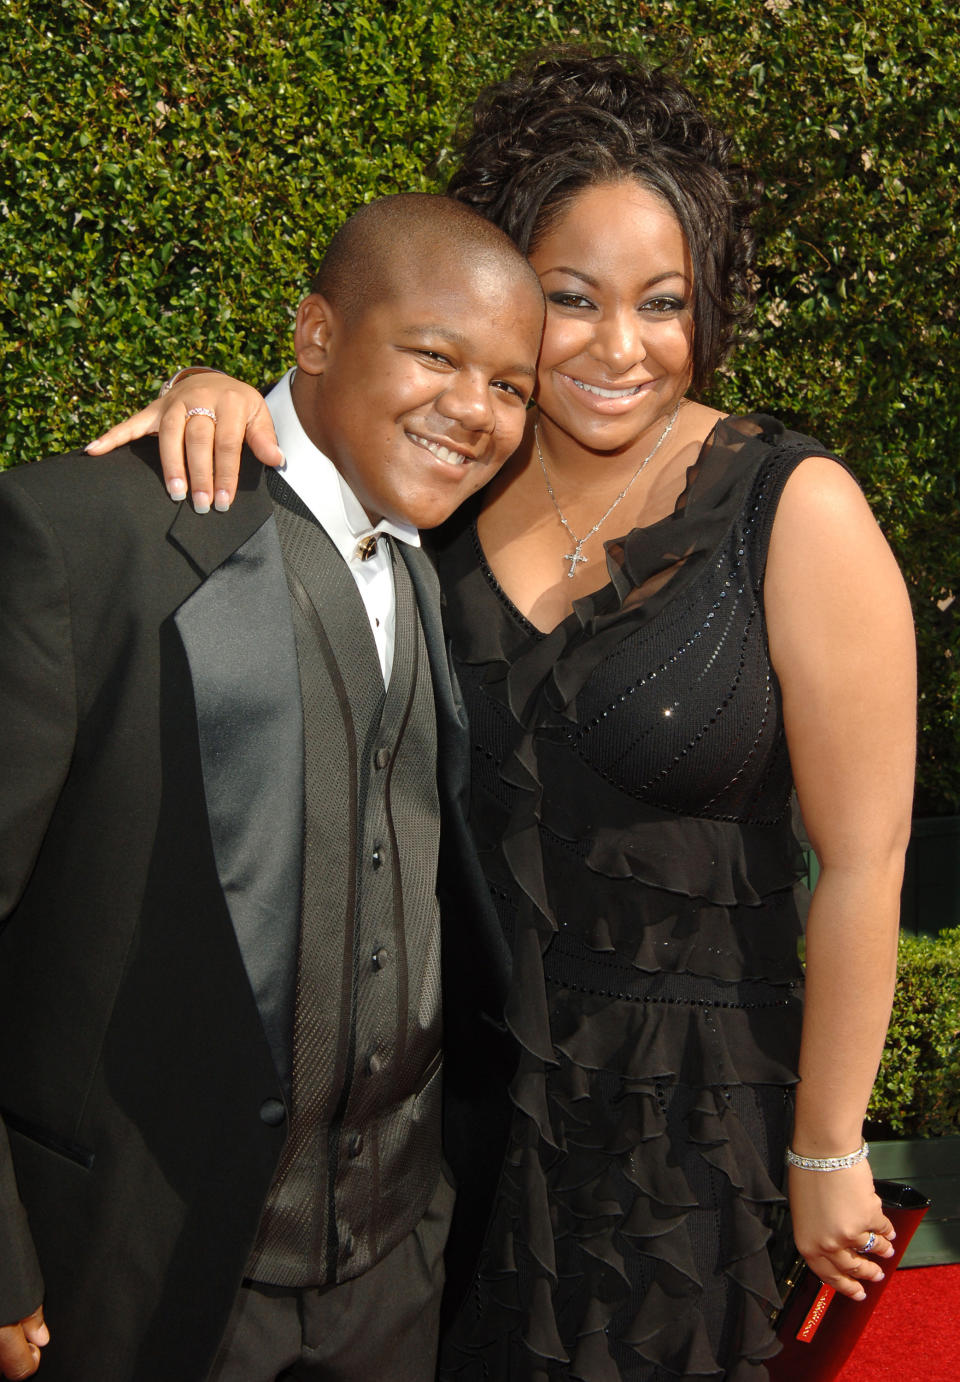 Kyle Massey and Raven during 57th Annual Primetime Creative Arts EMMY Awards - Arrivals & Red Carpet at Shrine Auditorium in Los Angeles, California, United States. (Photo by Jon Kopaloff/FilmMagic)